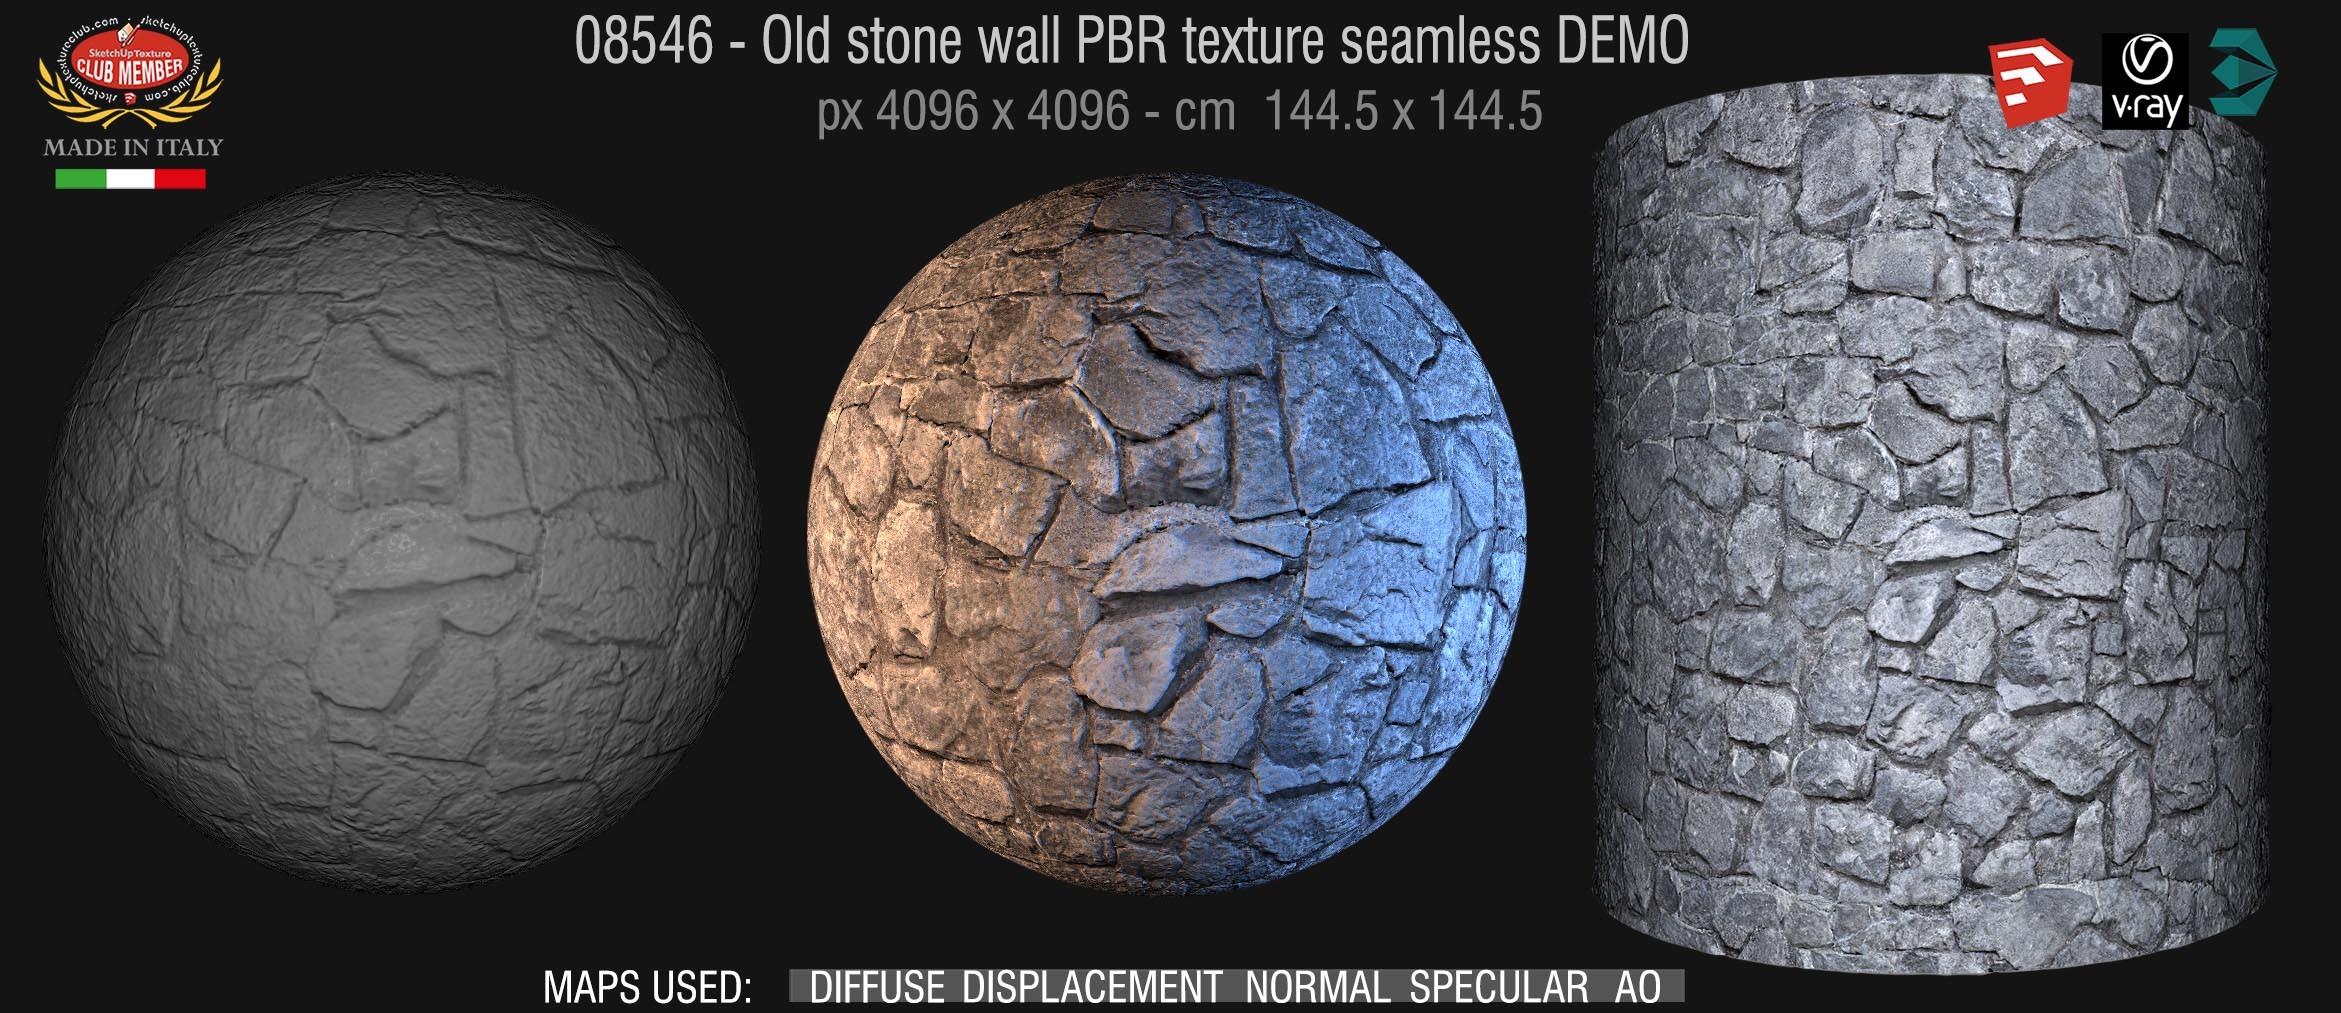 08546 Old stone wall PBR texture seamless DEMO